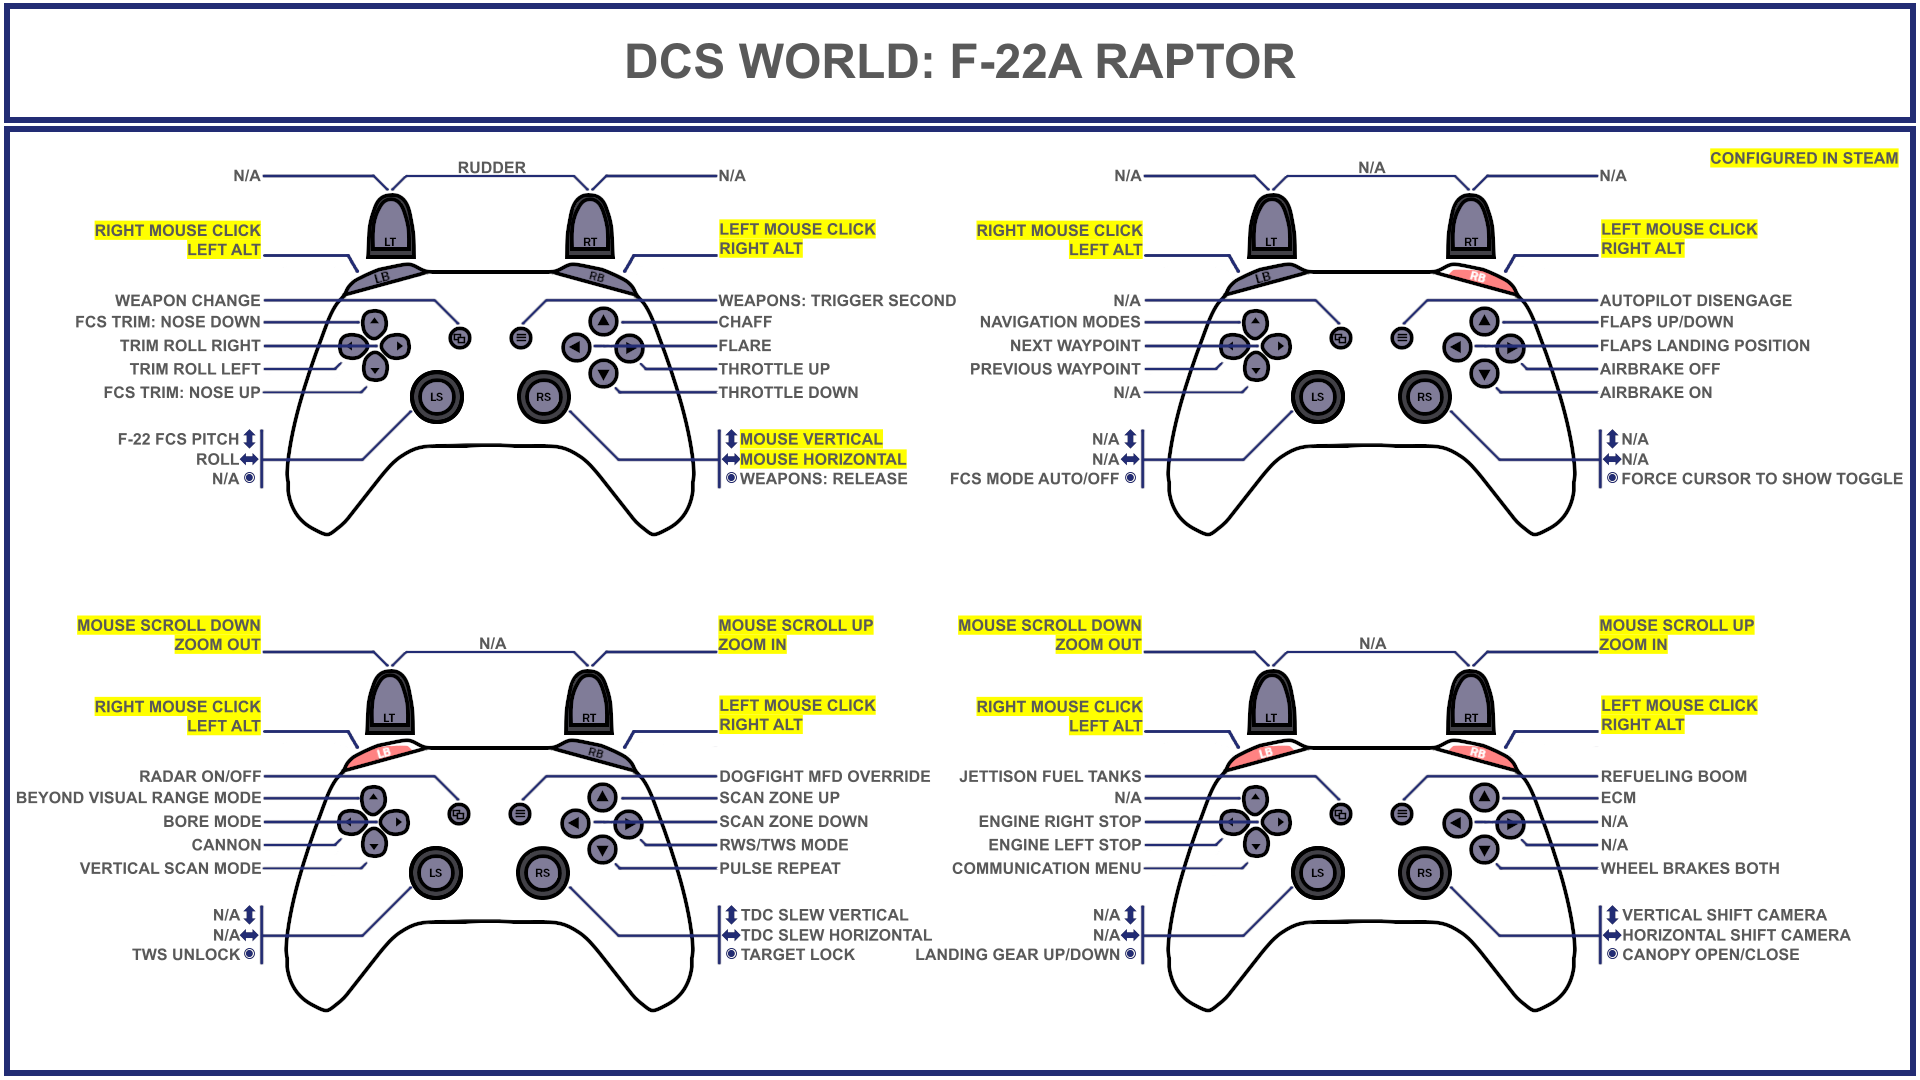 Tuuvas' Official F-22A Raptor Gamepad Controller Layout